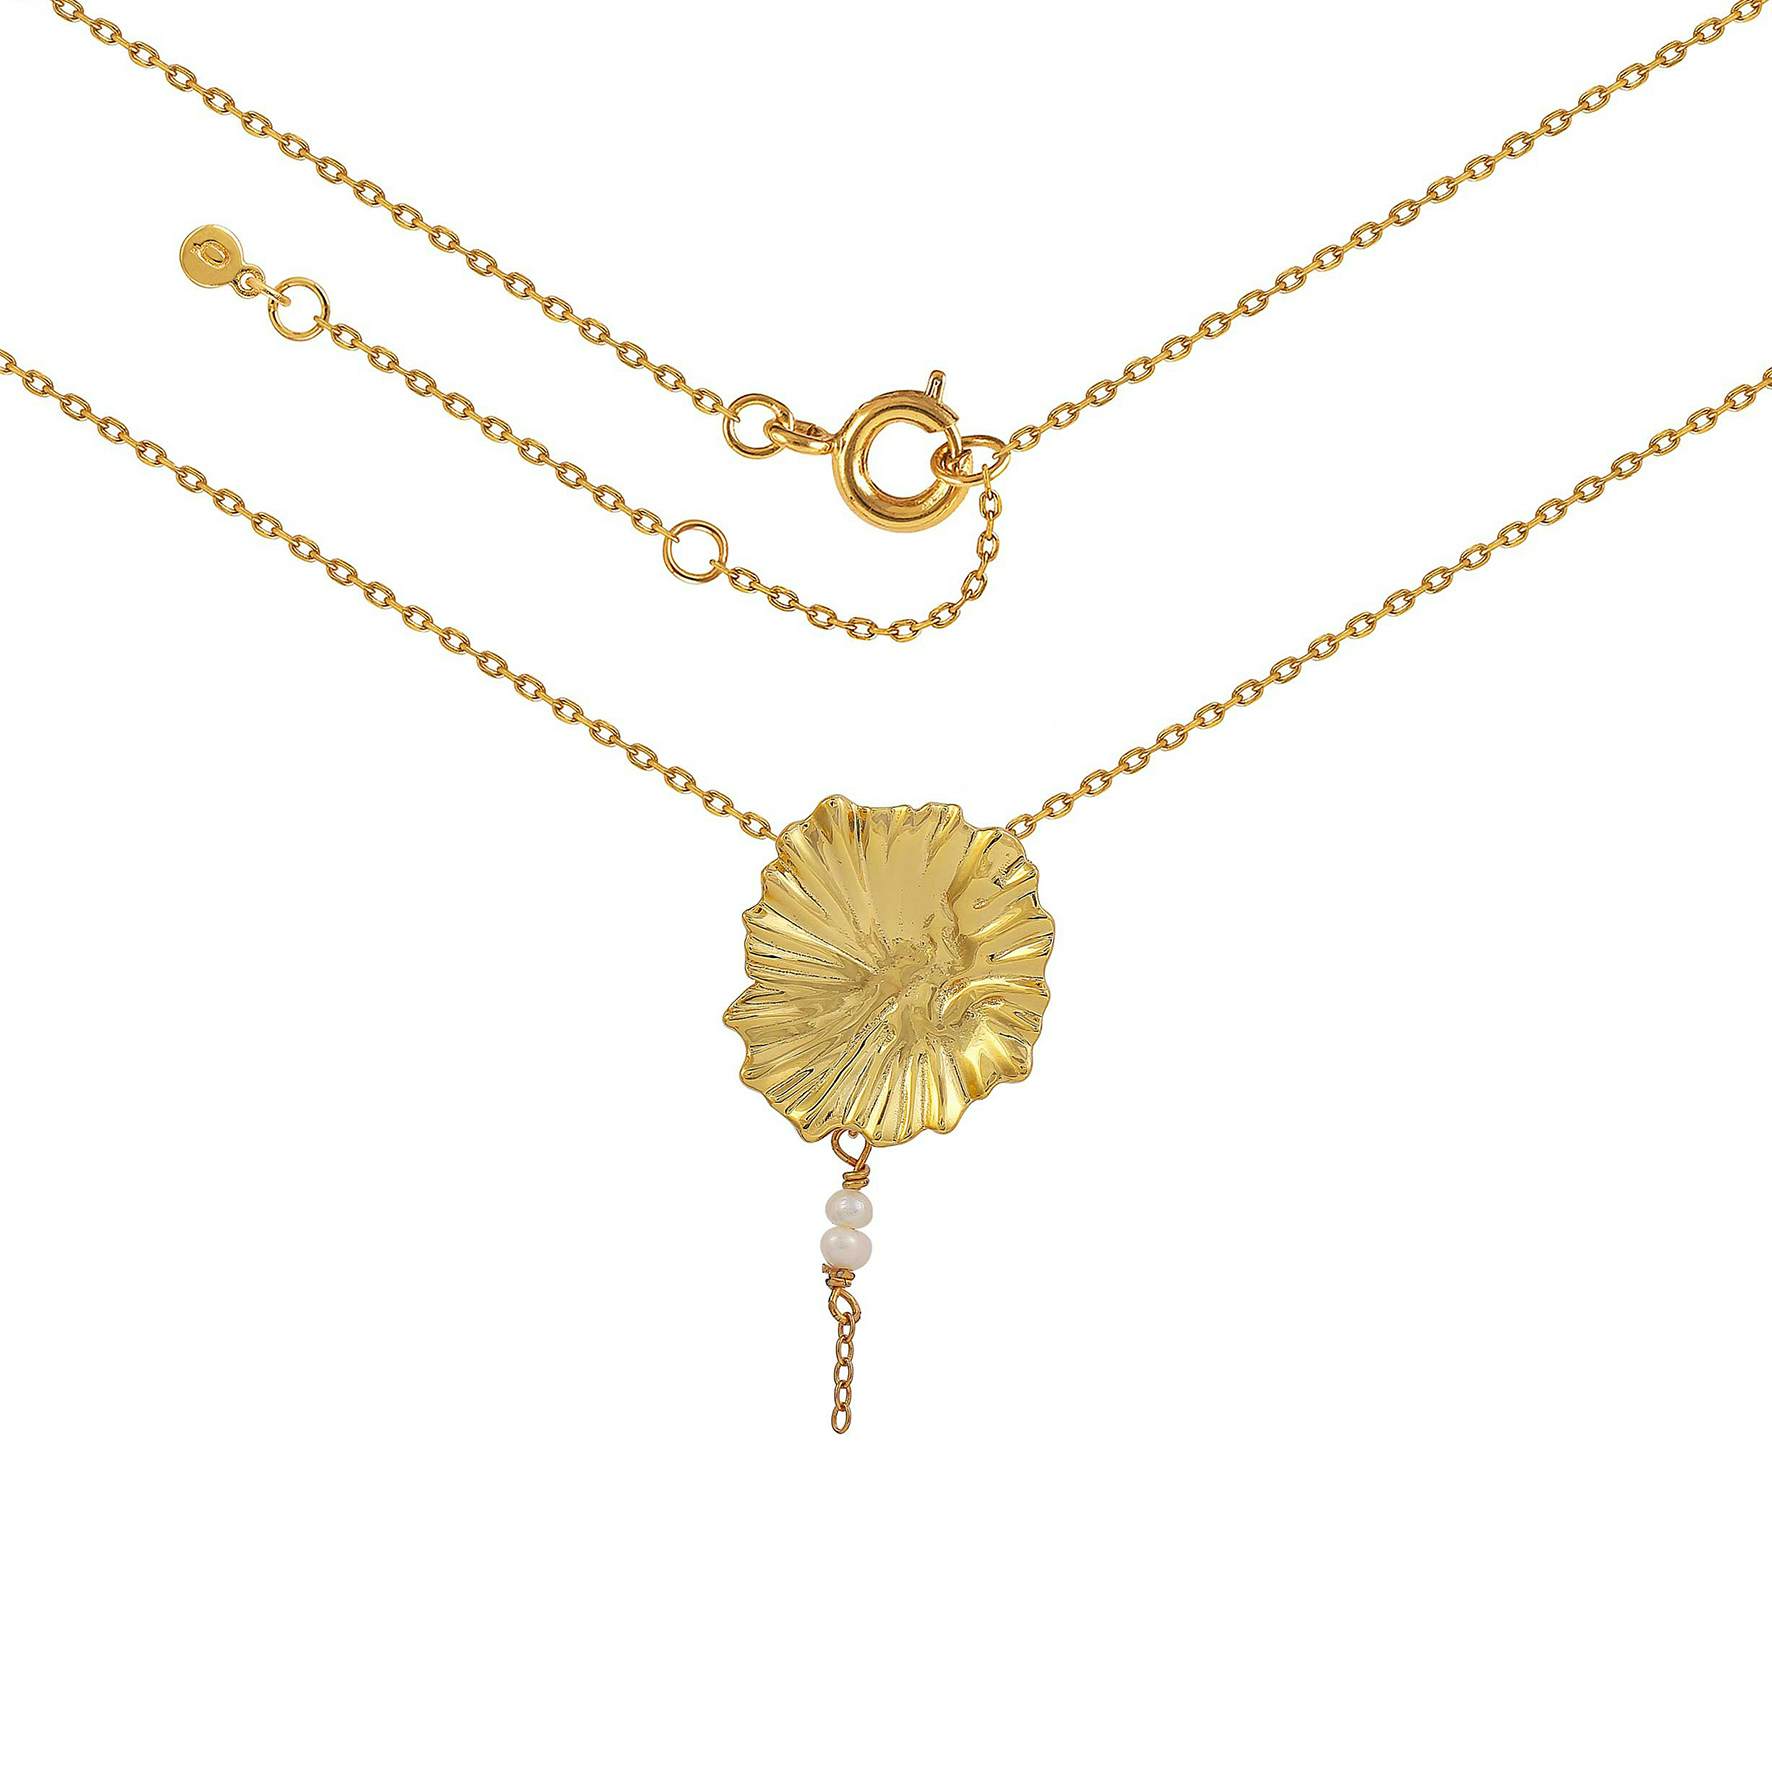 Dagmar Necklace from Hultquist Copenhagen in Goldplated-Silver Sterling 925